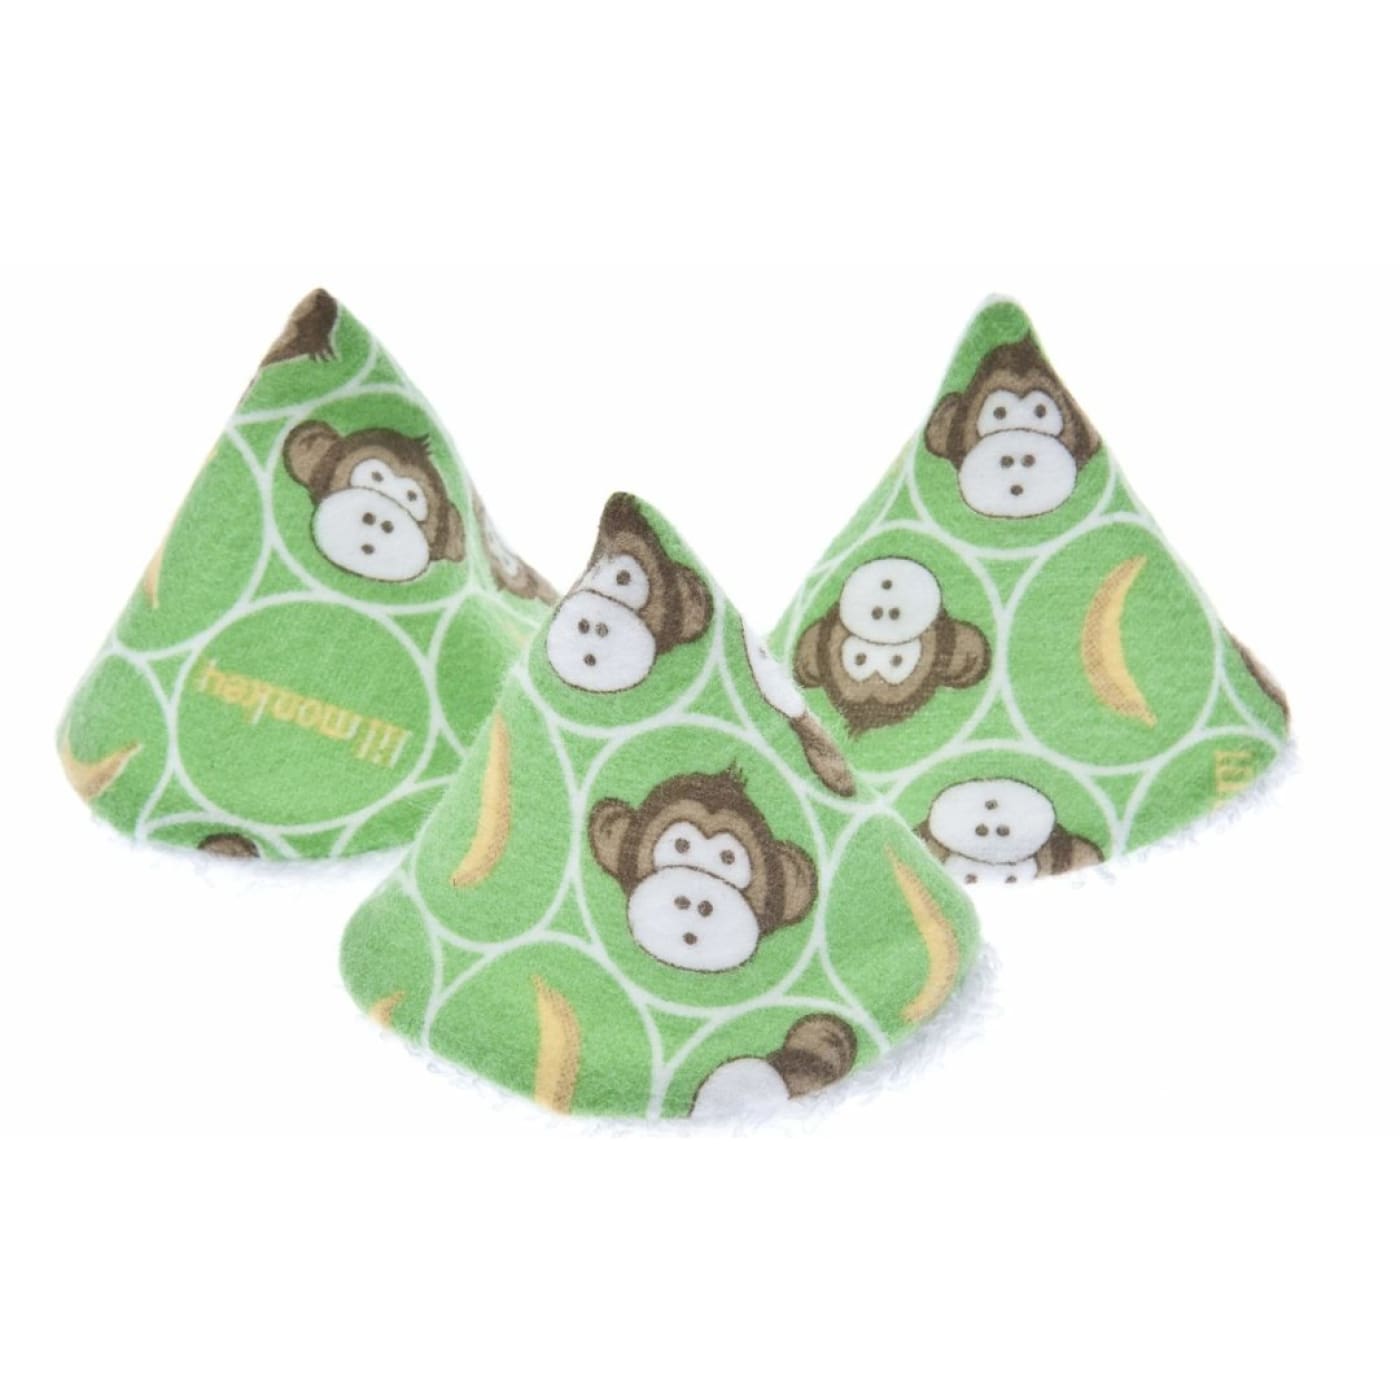 PEE-PEE TEEPEE LIL MONKEY - Lil Monkey - BATHTIME & CHANGING - NAPPIES/WIPES/ACCESSORIES